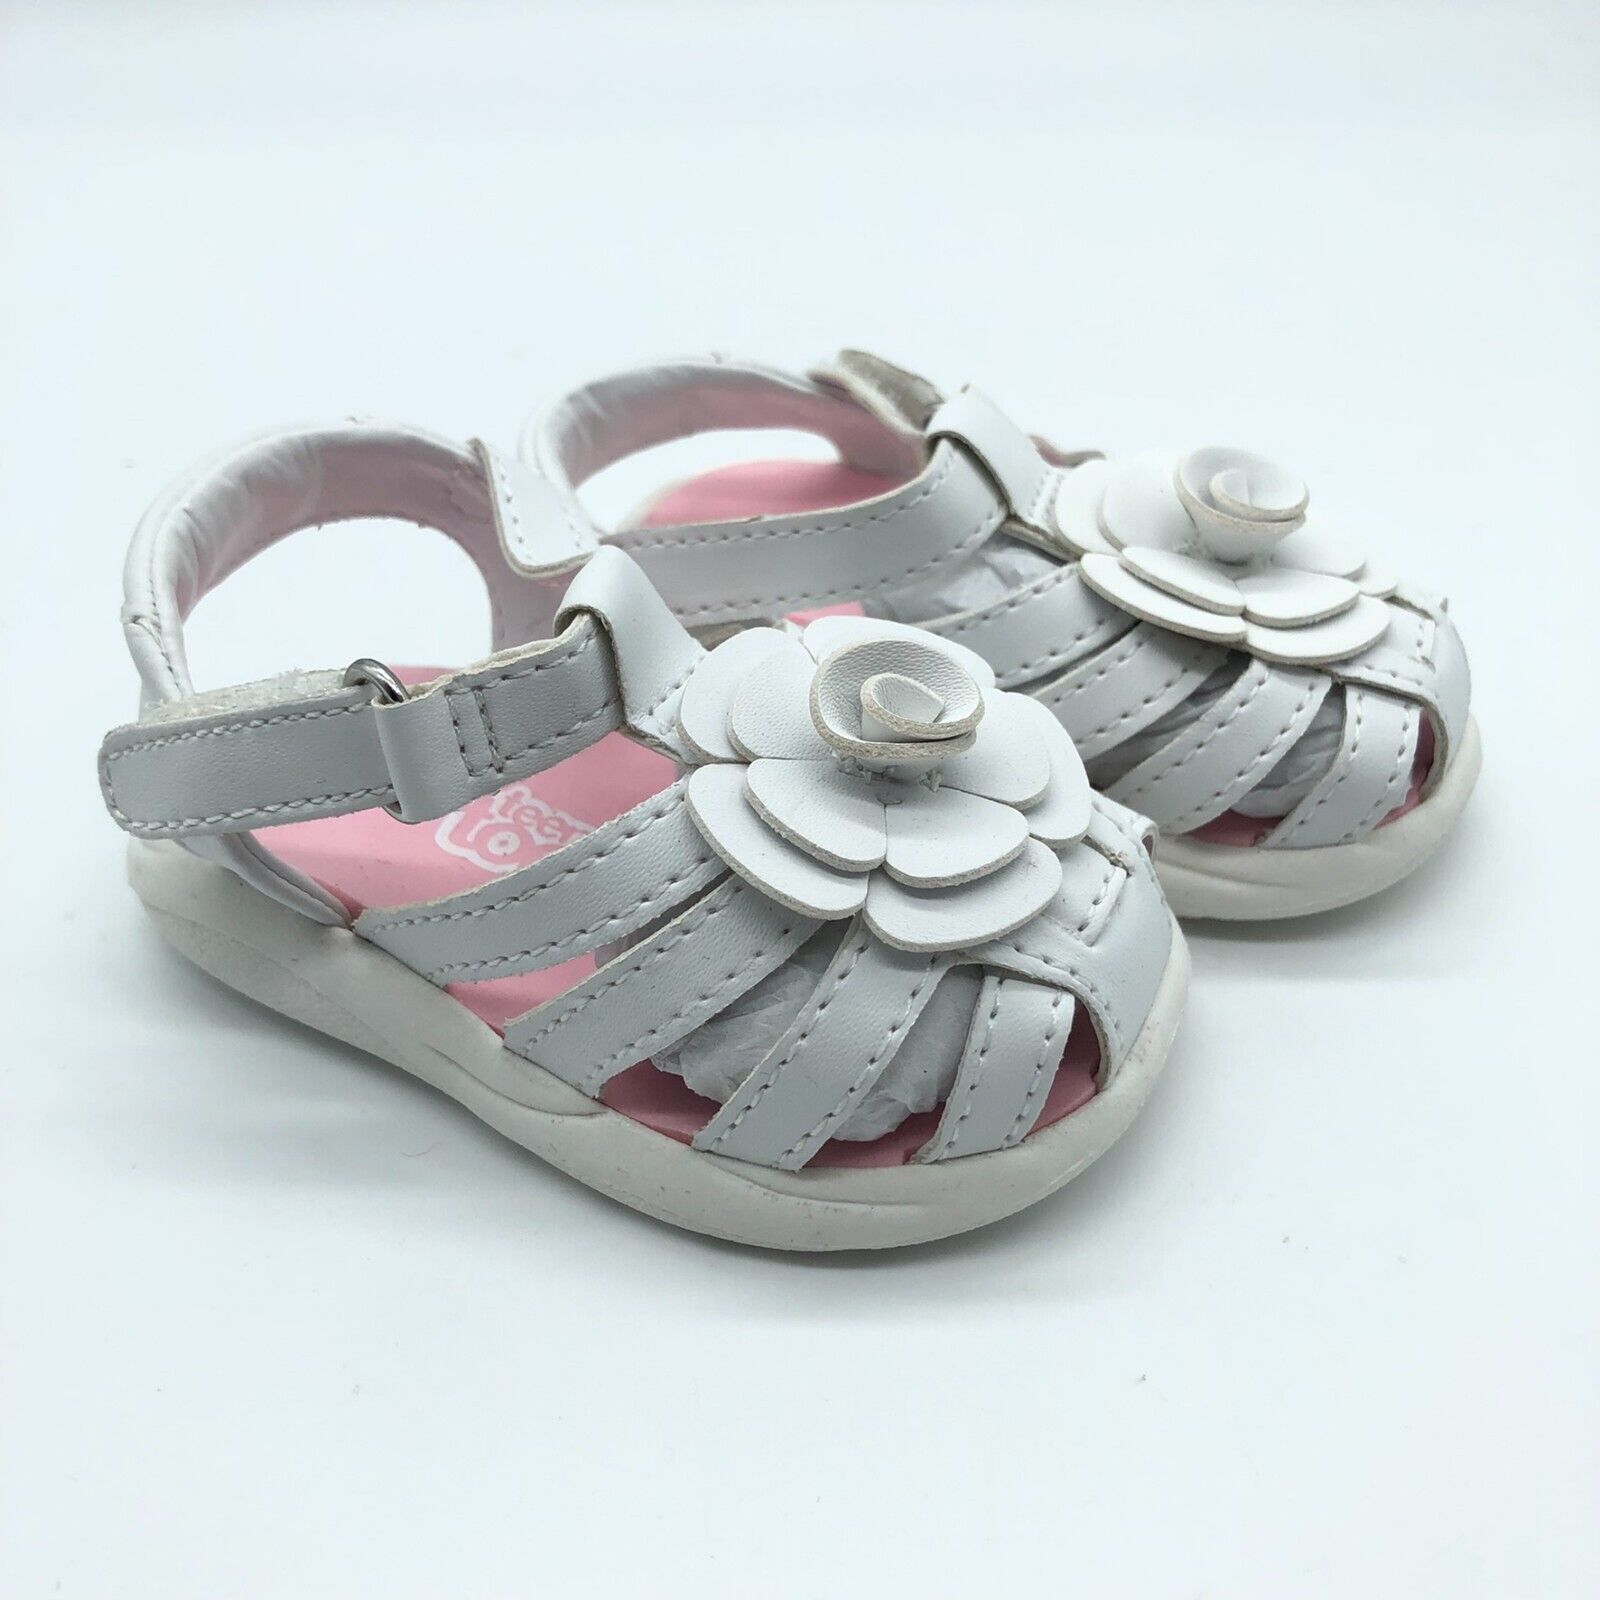 Teeny Toes Toddler Girls Sandals Strappy Faux Leather Floral Applique White 2W - $9.74